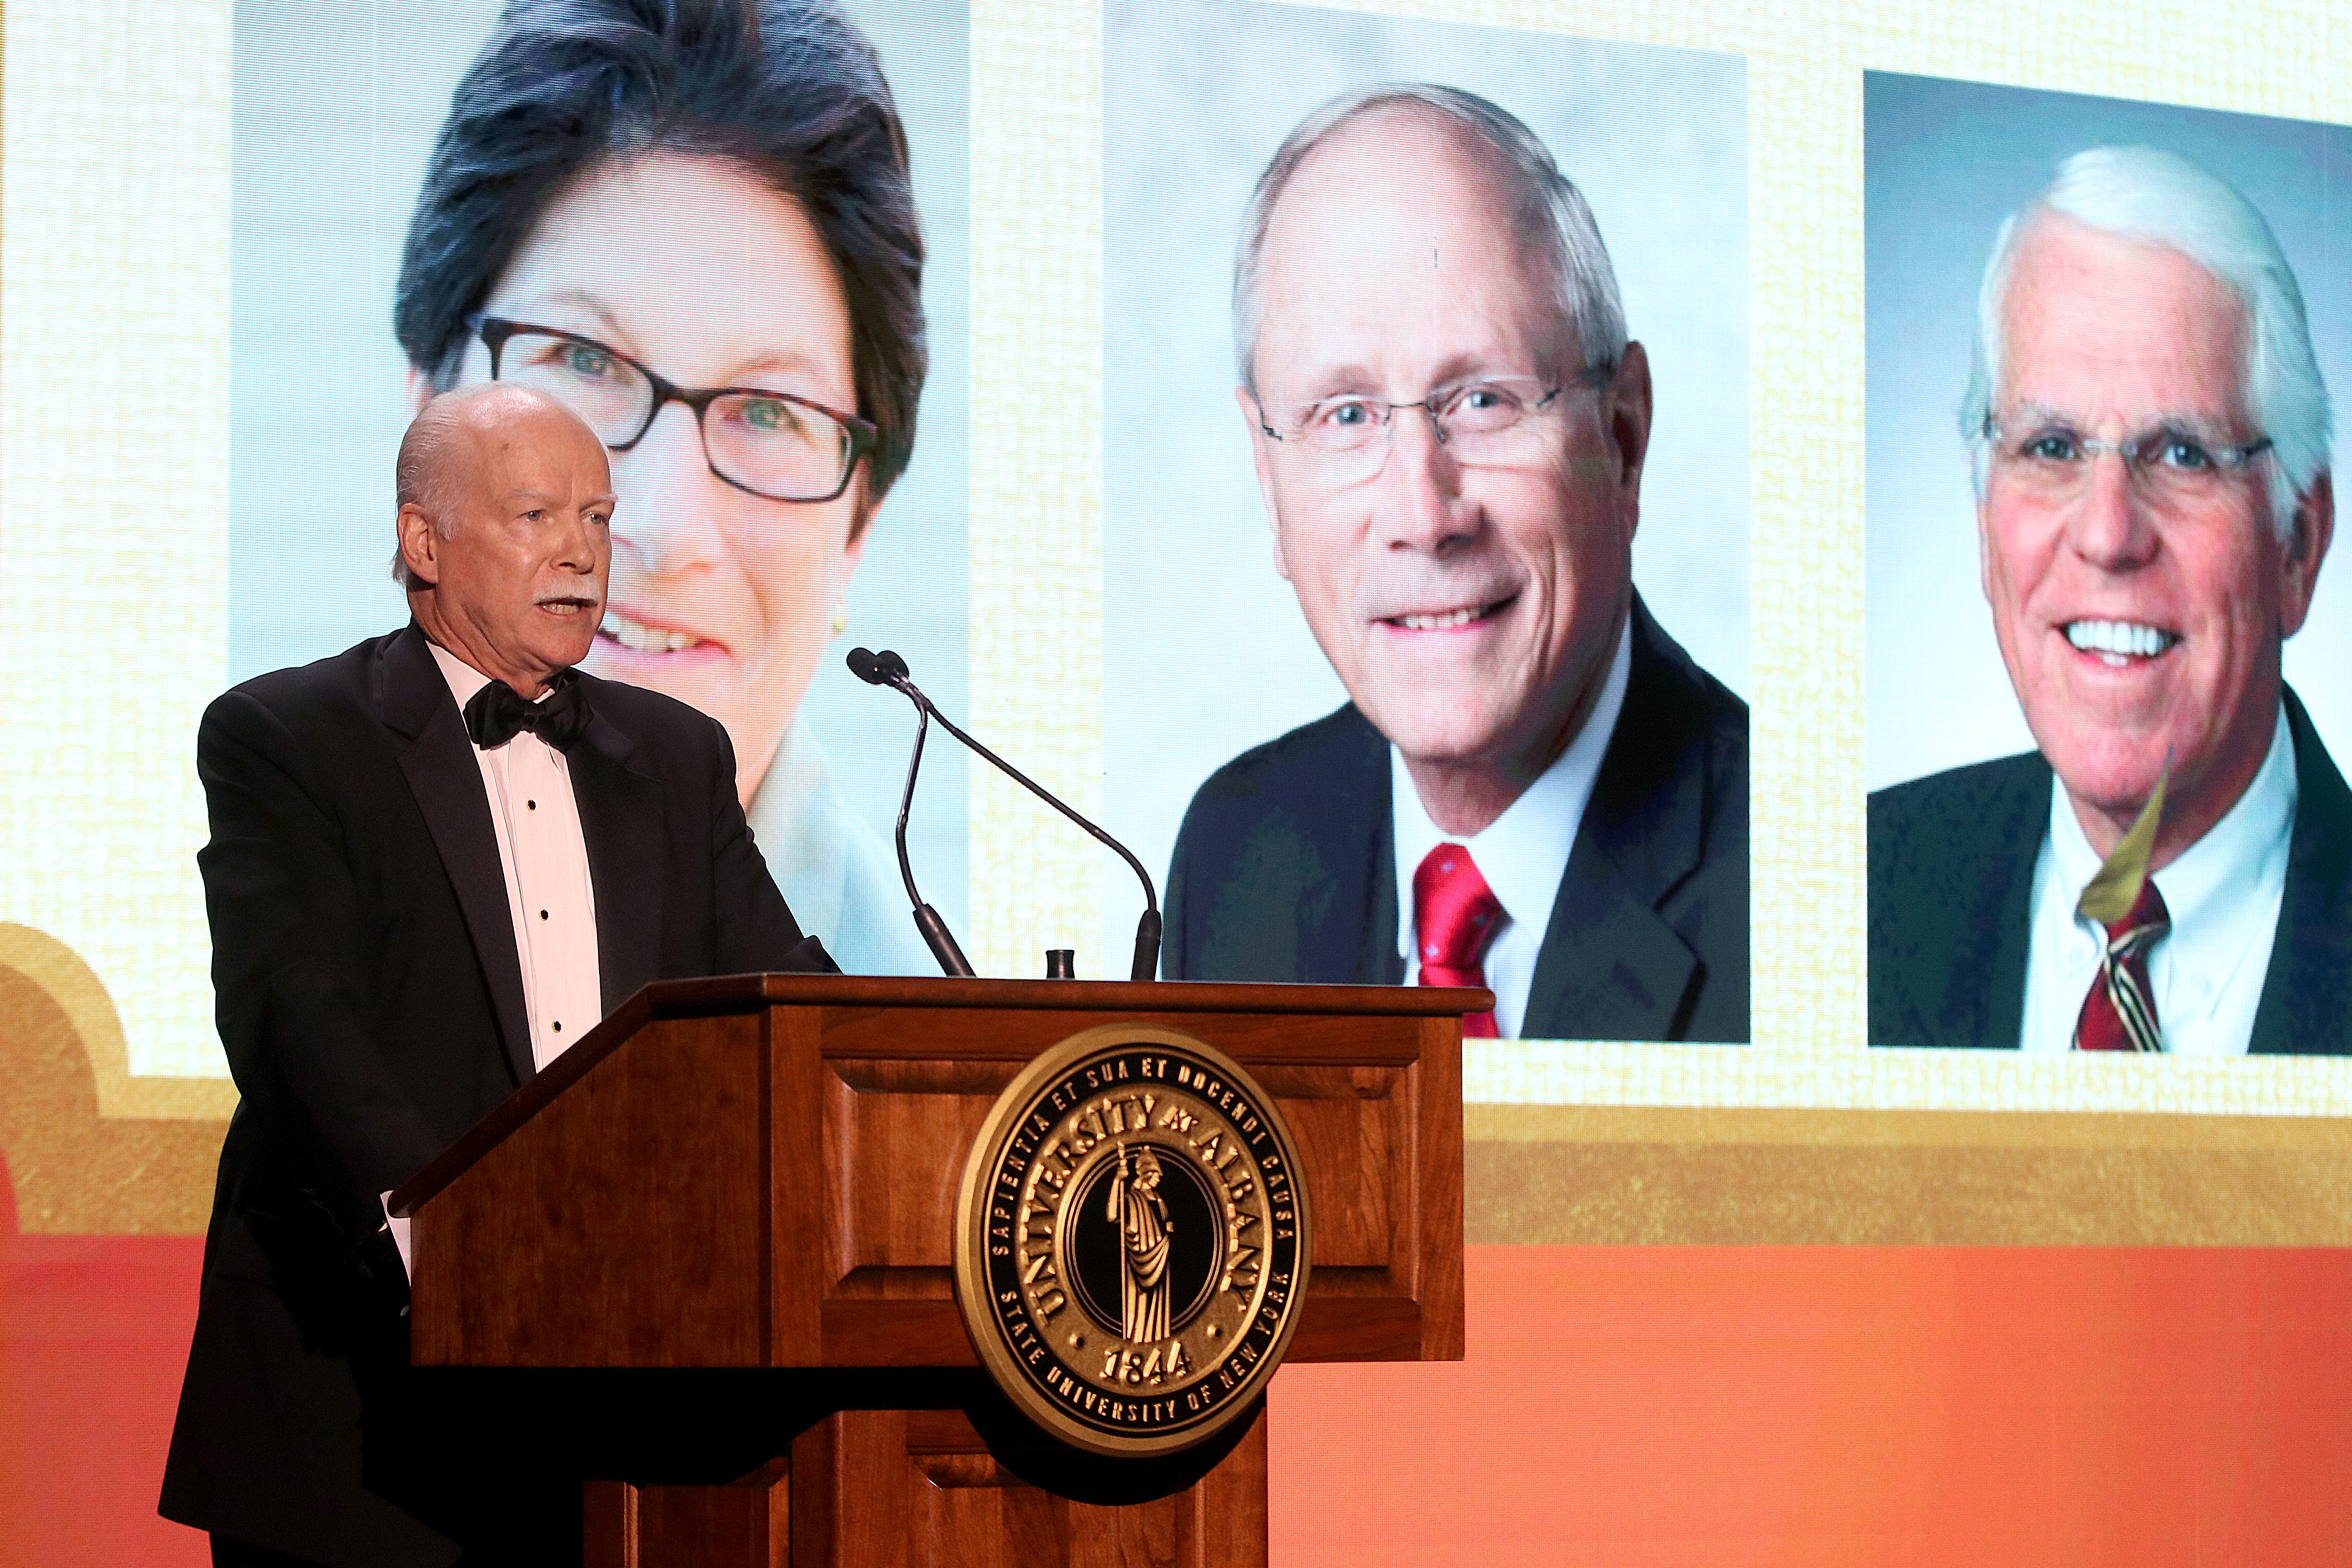 A man in a tuxedo speaks at a lectern framed in the background by the images of three faces projected on a screen behind him.